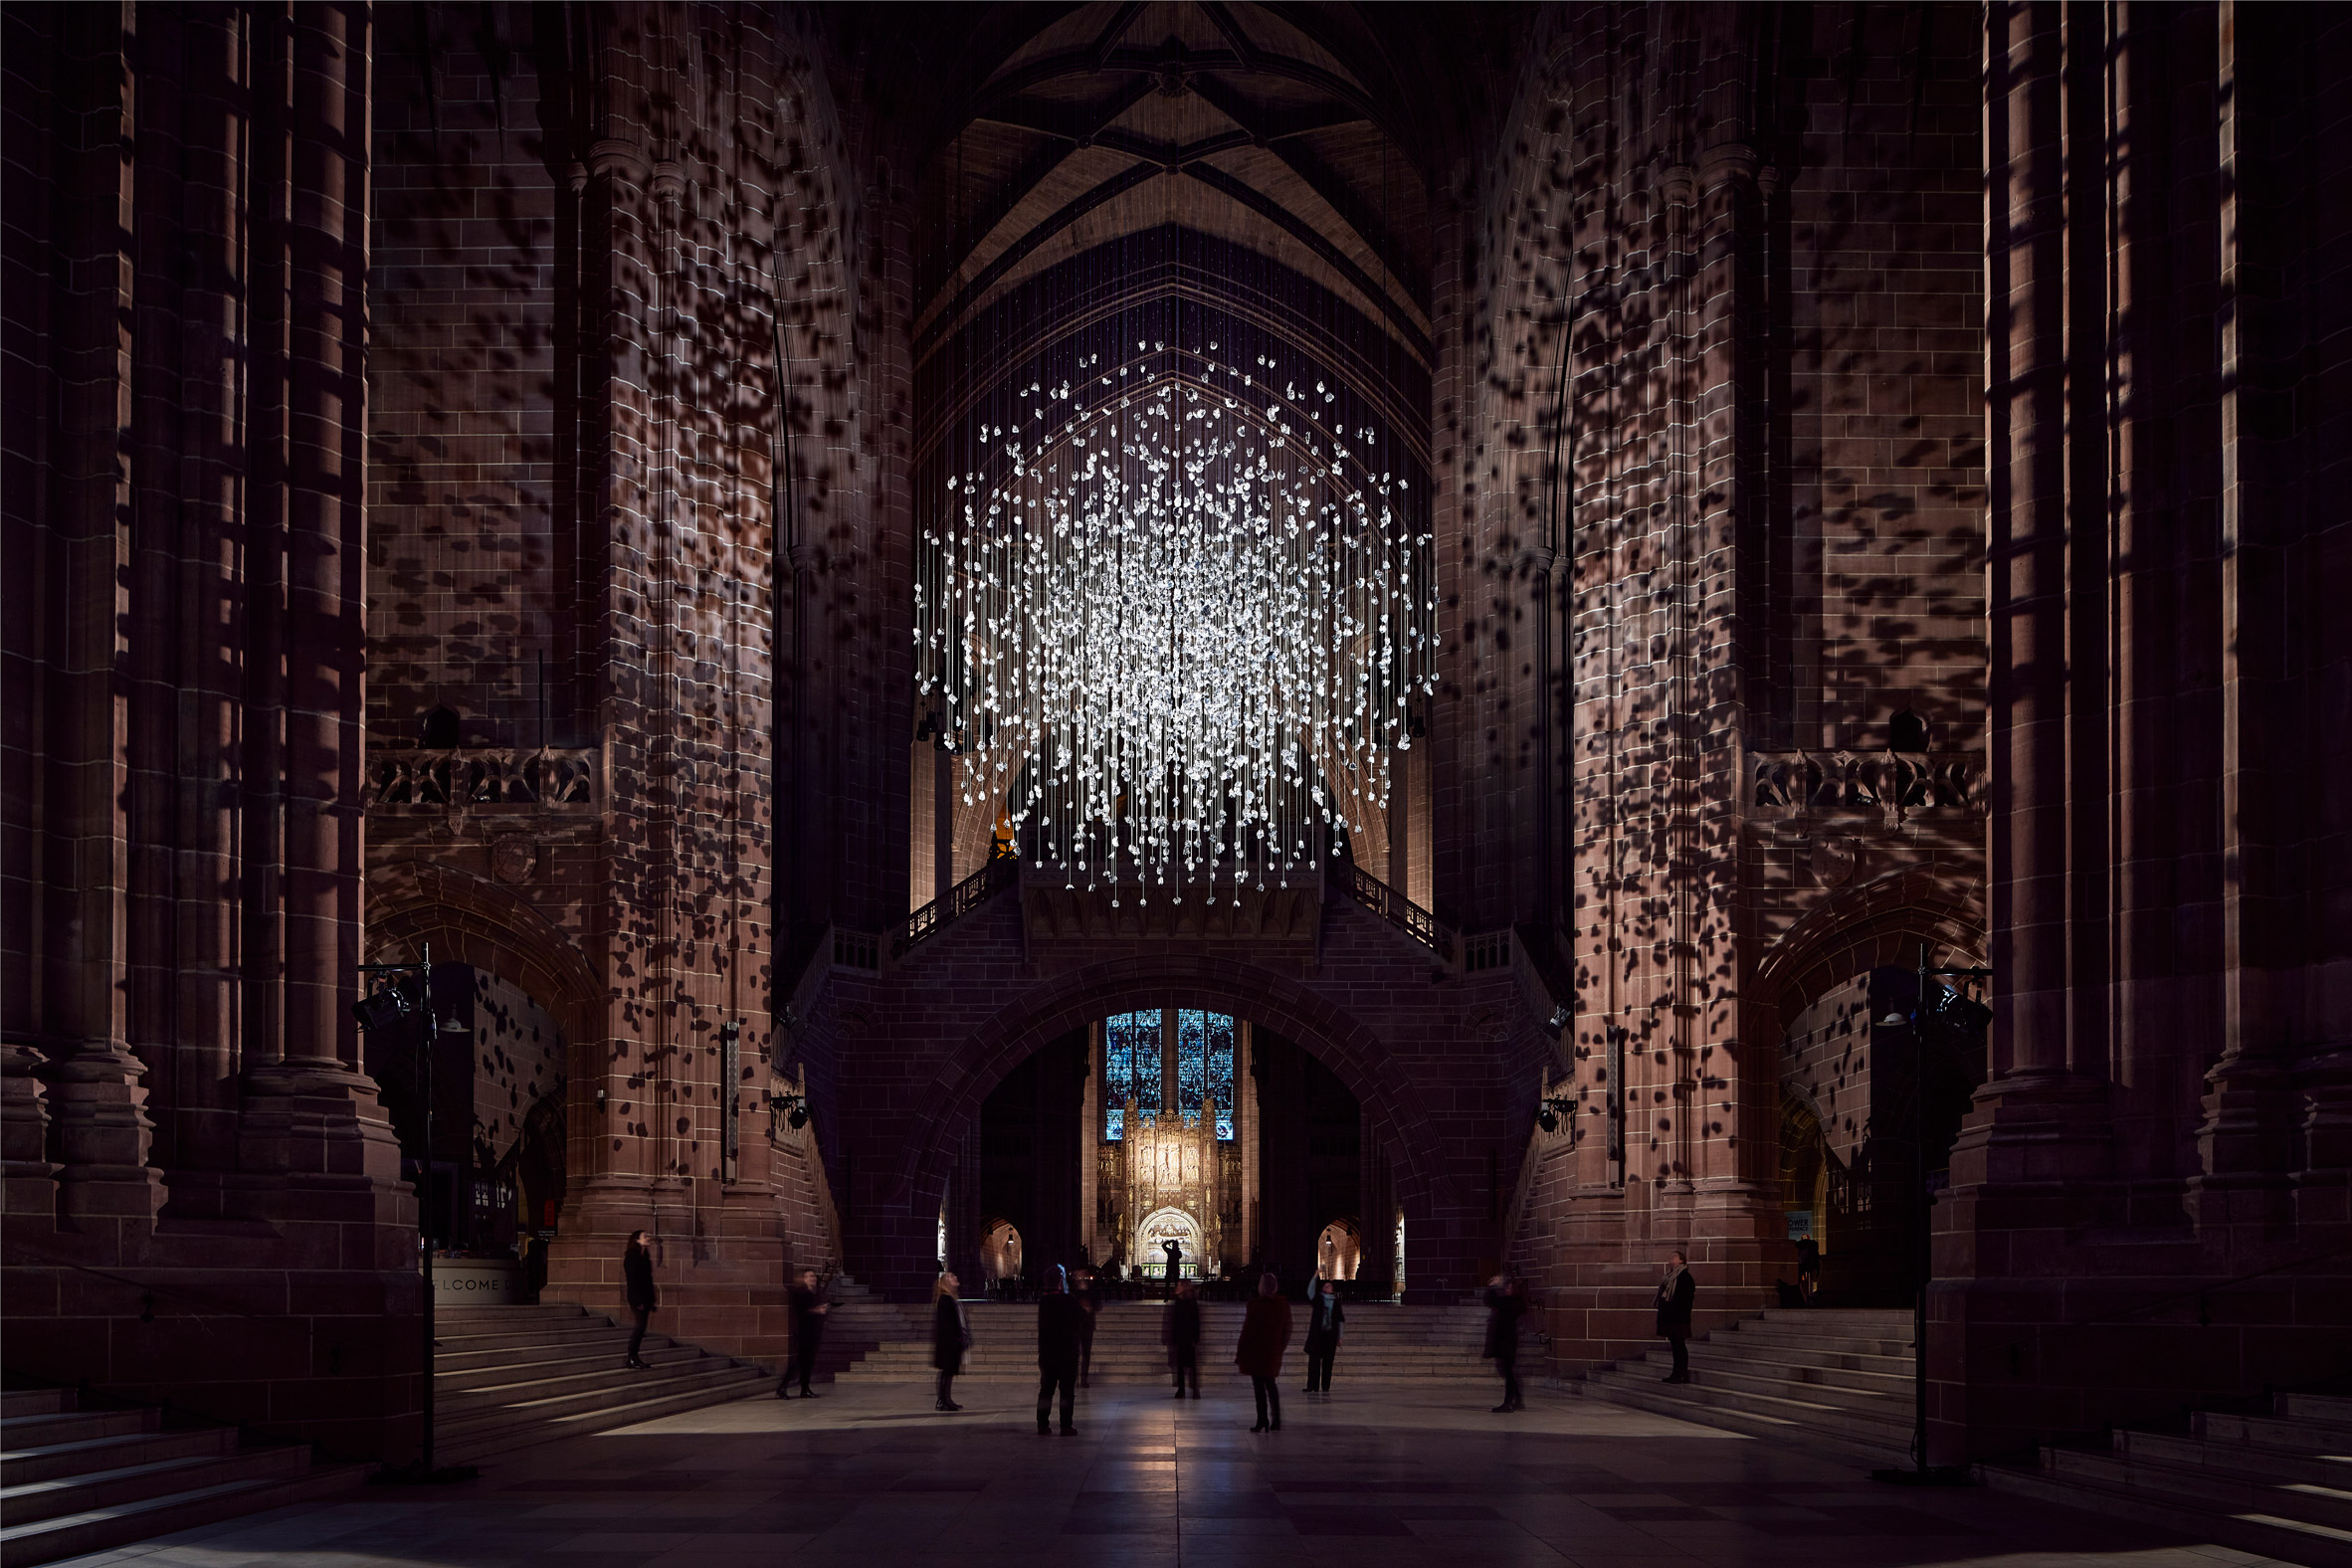 Spherical installation made up of suspended piece of coal illuminated inside a cathedral